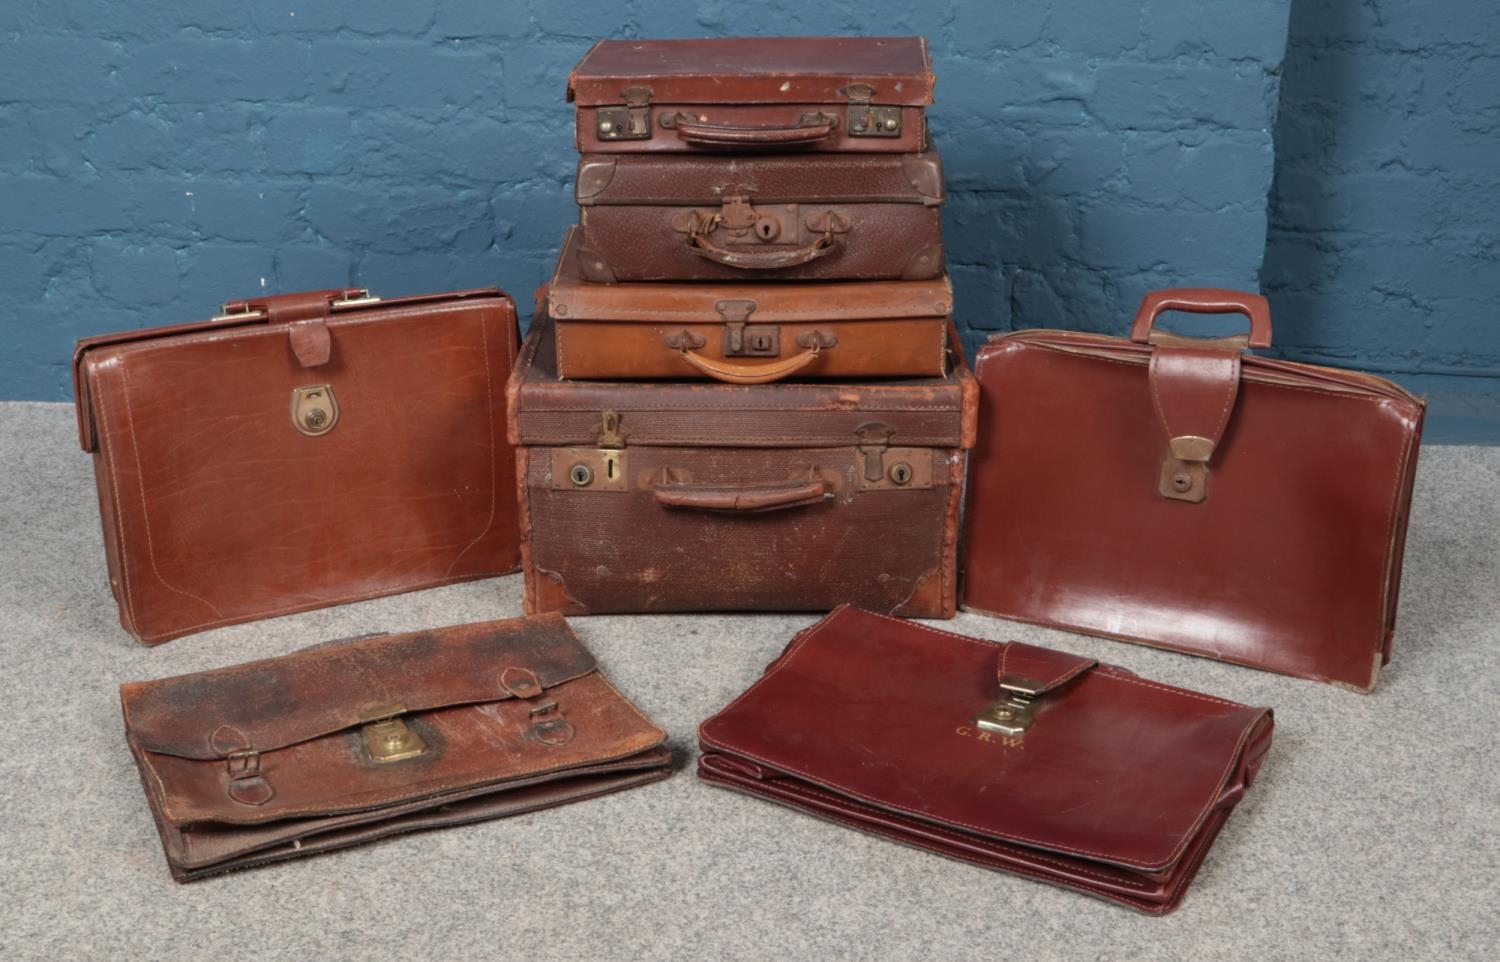 A quantity of leather briefcases, satchels and expanding folders. Clasps damaged on some examples.